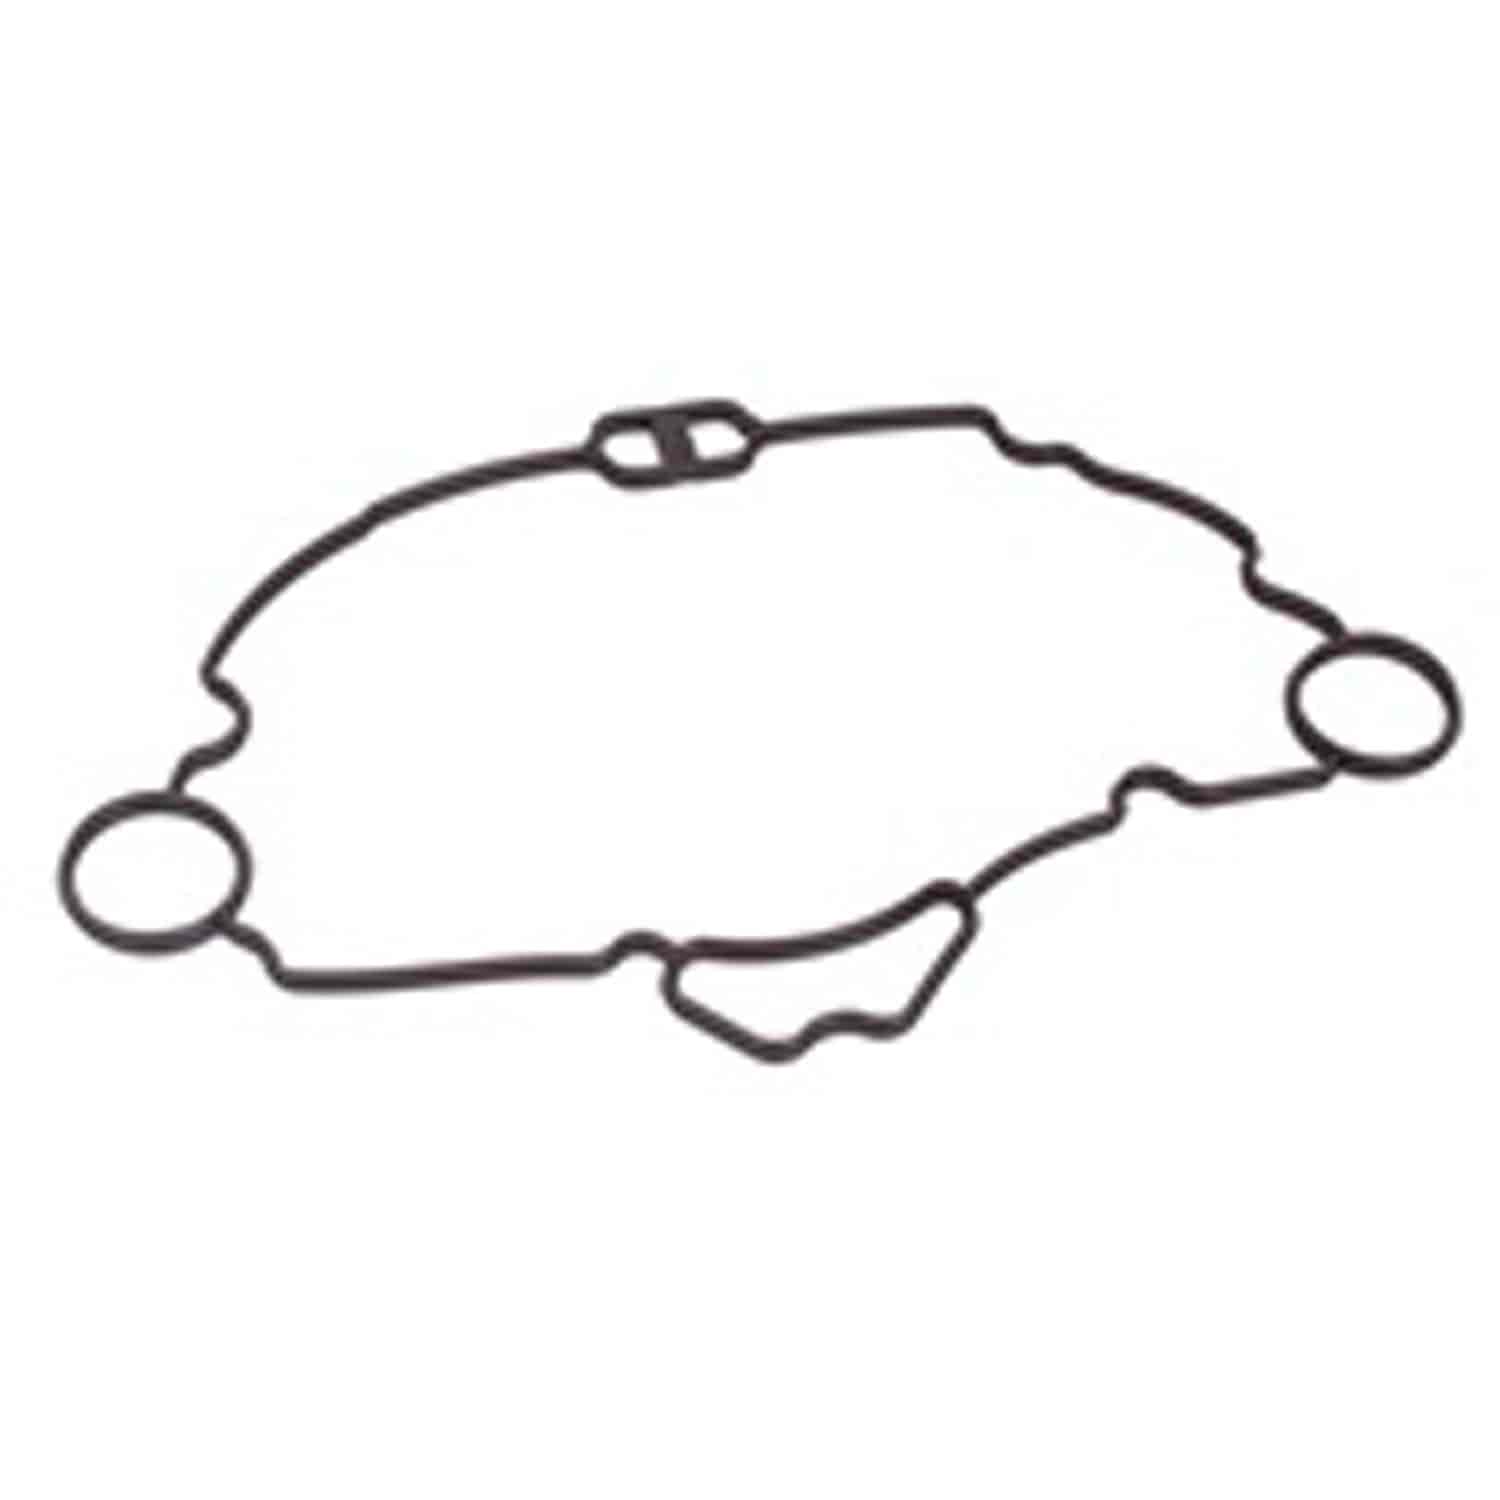 Timing Cover Gasket for 2005-2010 Jeep Grand Cherokee with 5.7L or 6.1L Engine